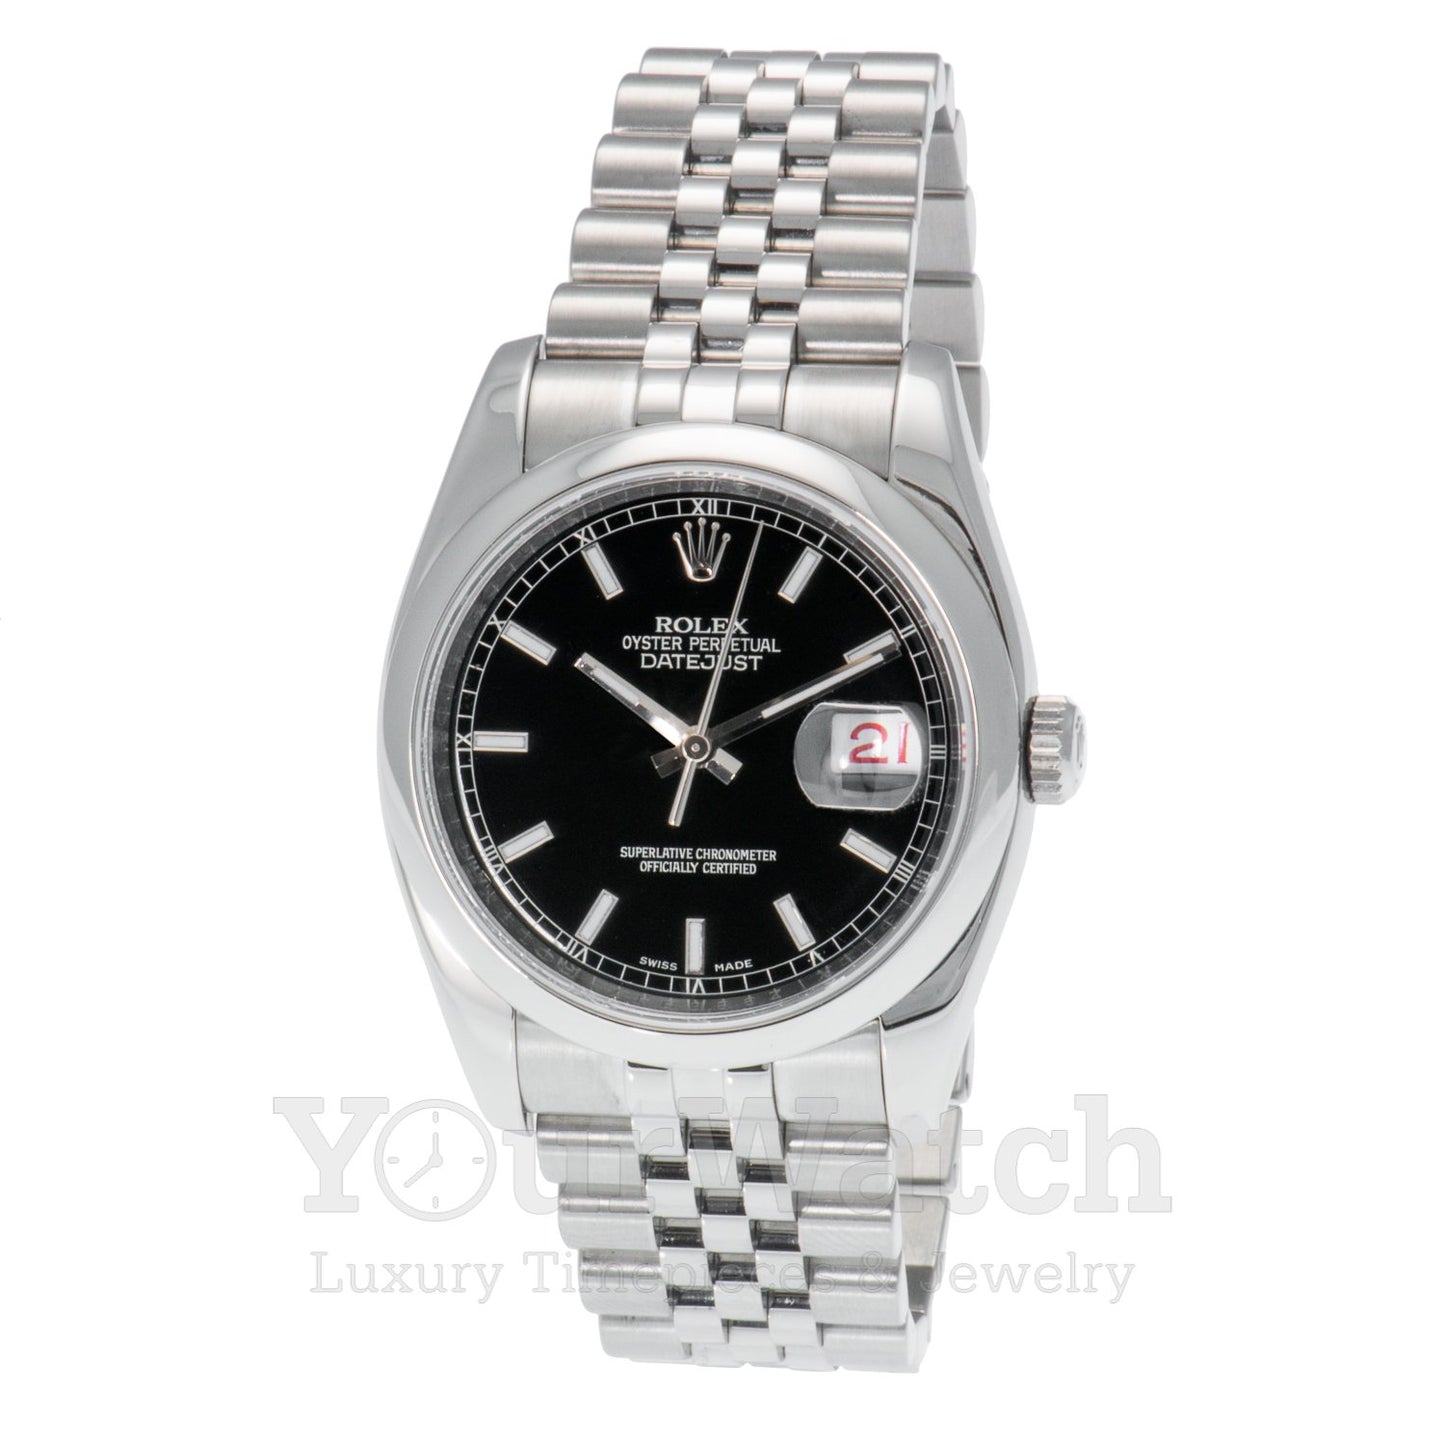 Rolex 116200 Datejust Stainless Steel Black Dial 36mm Watch